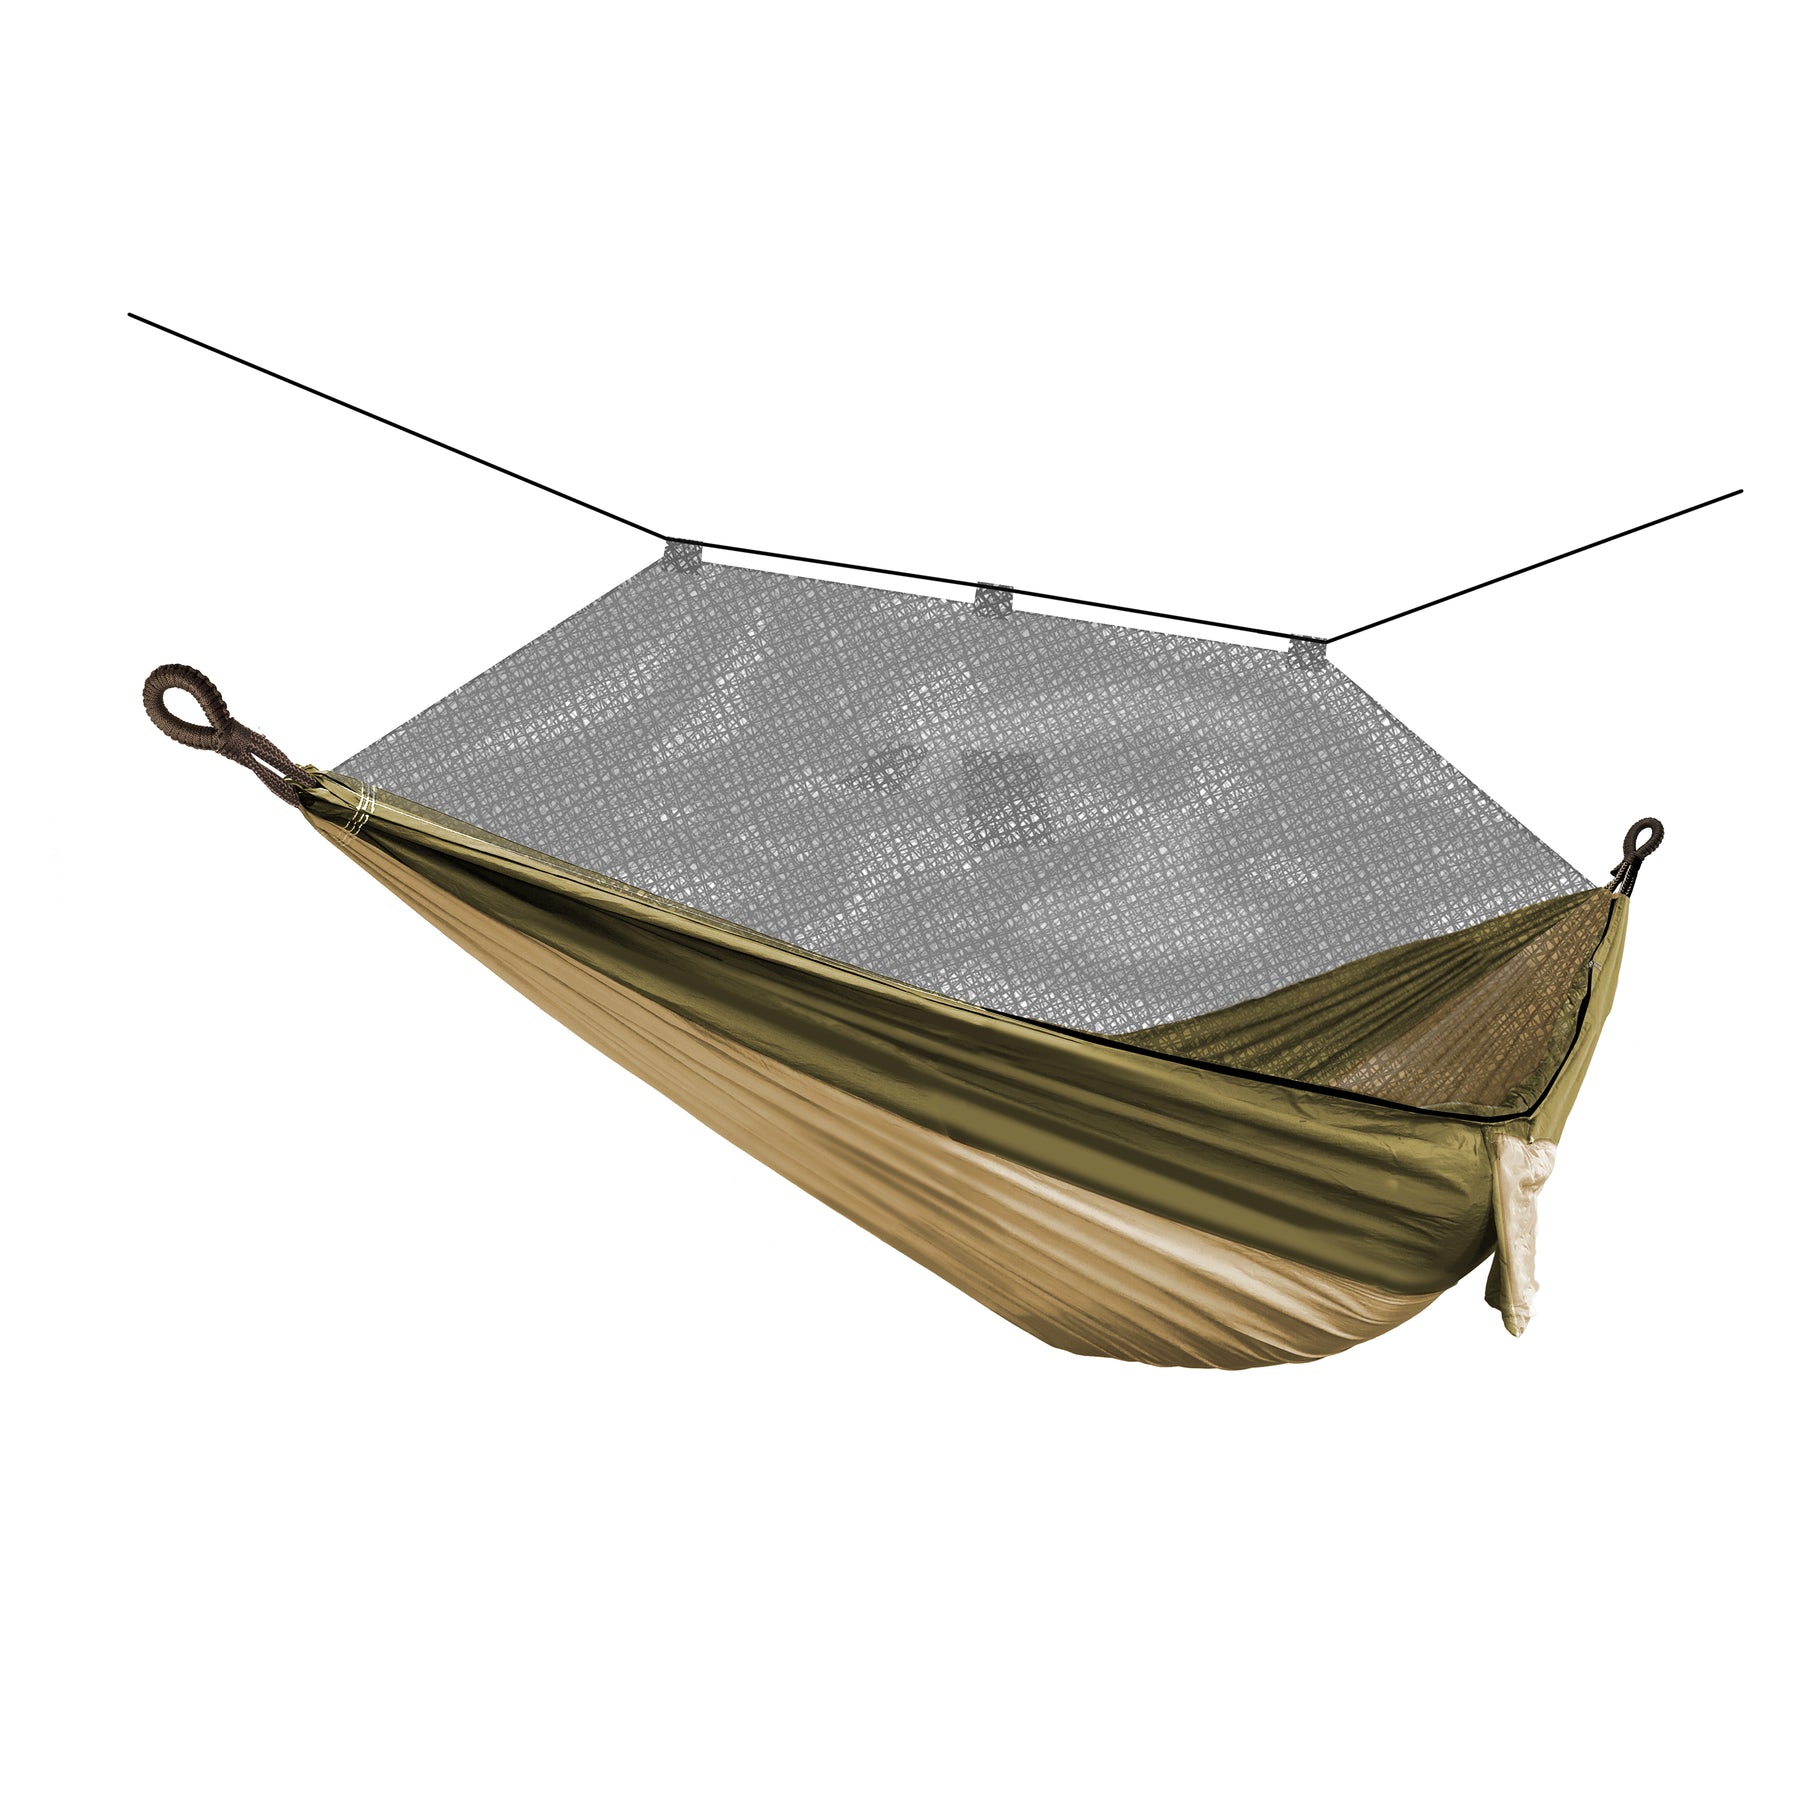 Bliss Hammocks 54-inch Wide Hammock in a Bag with mosquito net and tree straps in the desert storm variation.